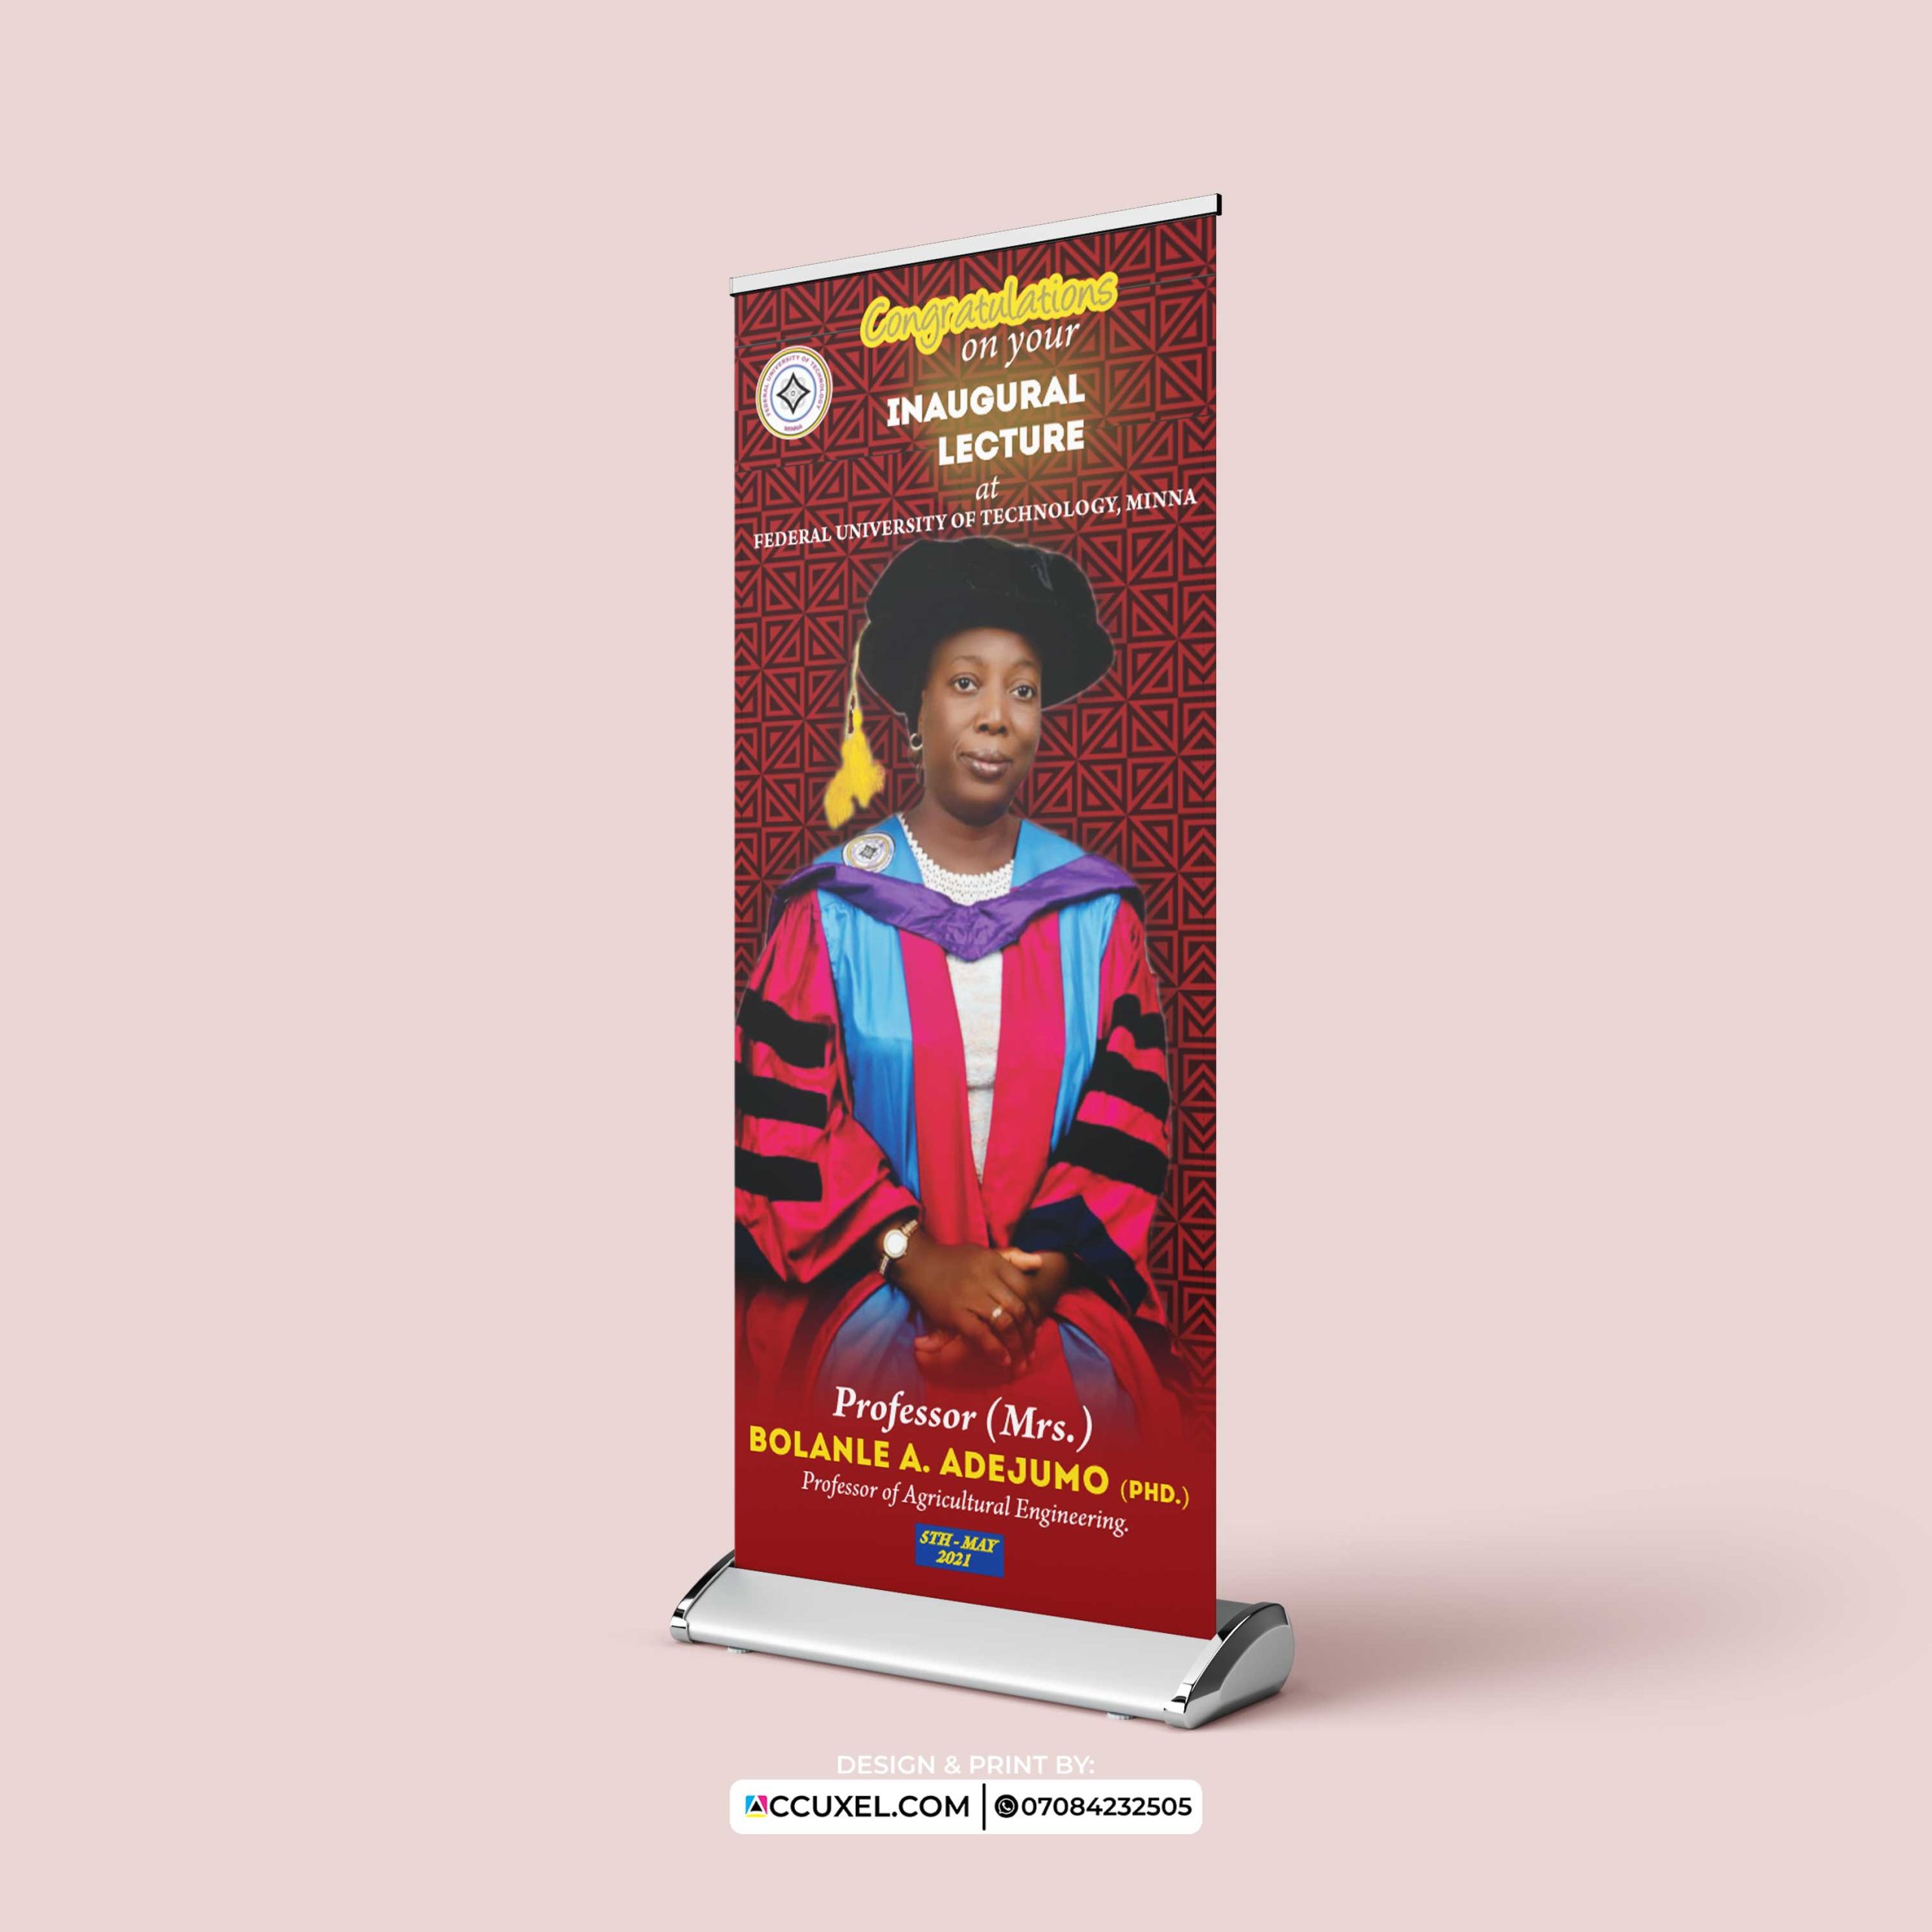 convocation retractable banner design and printing